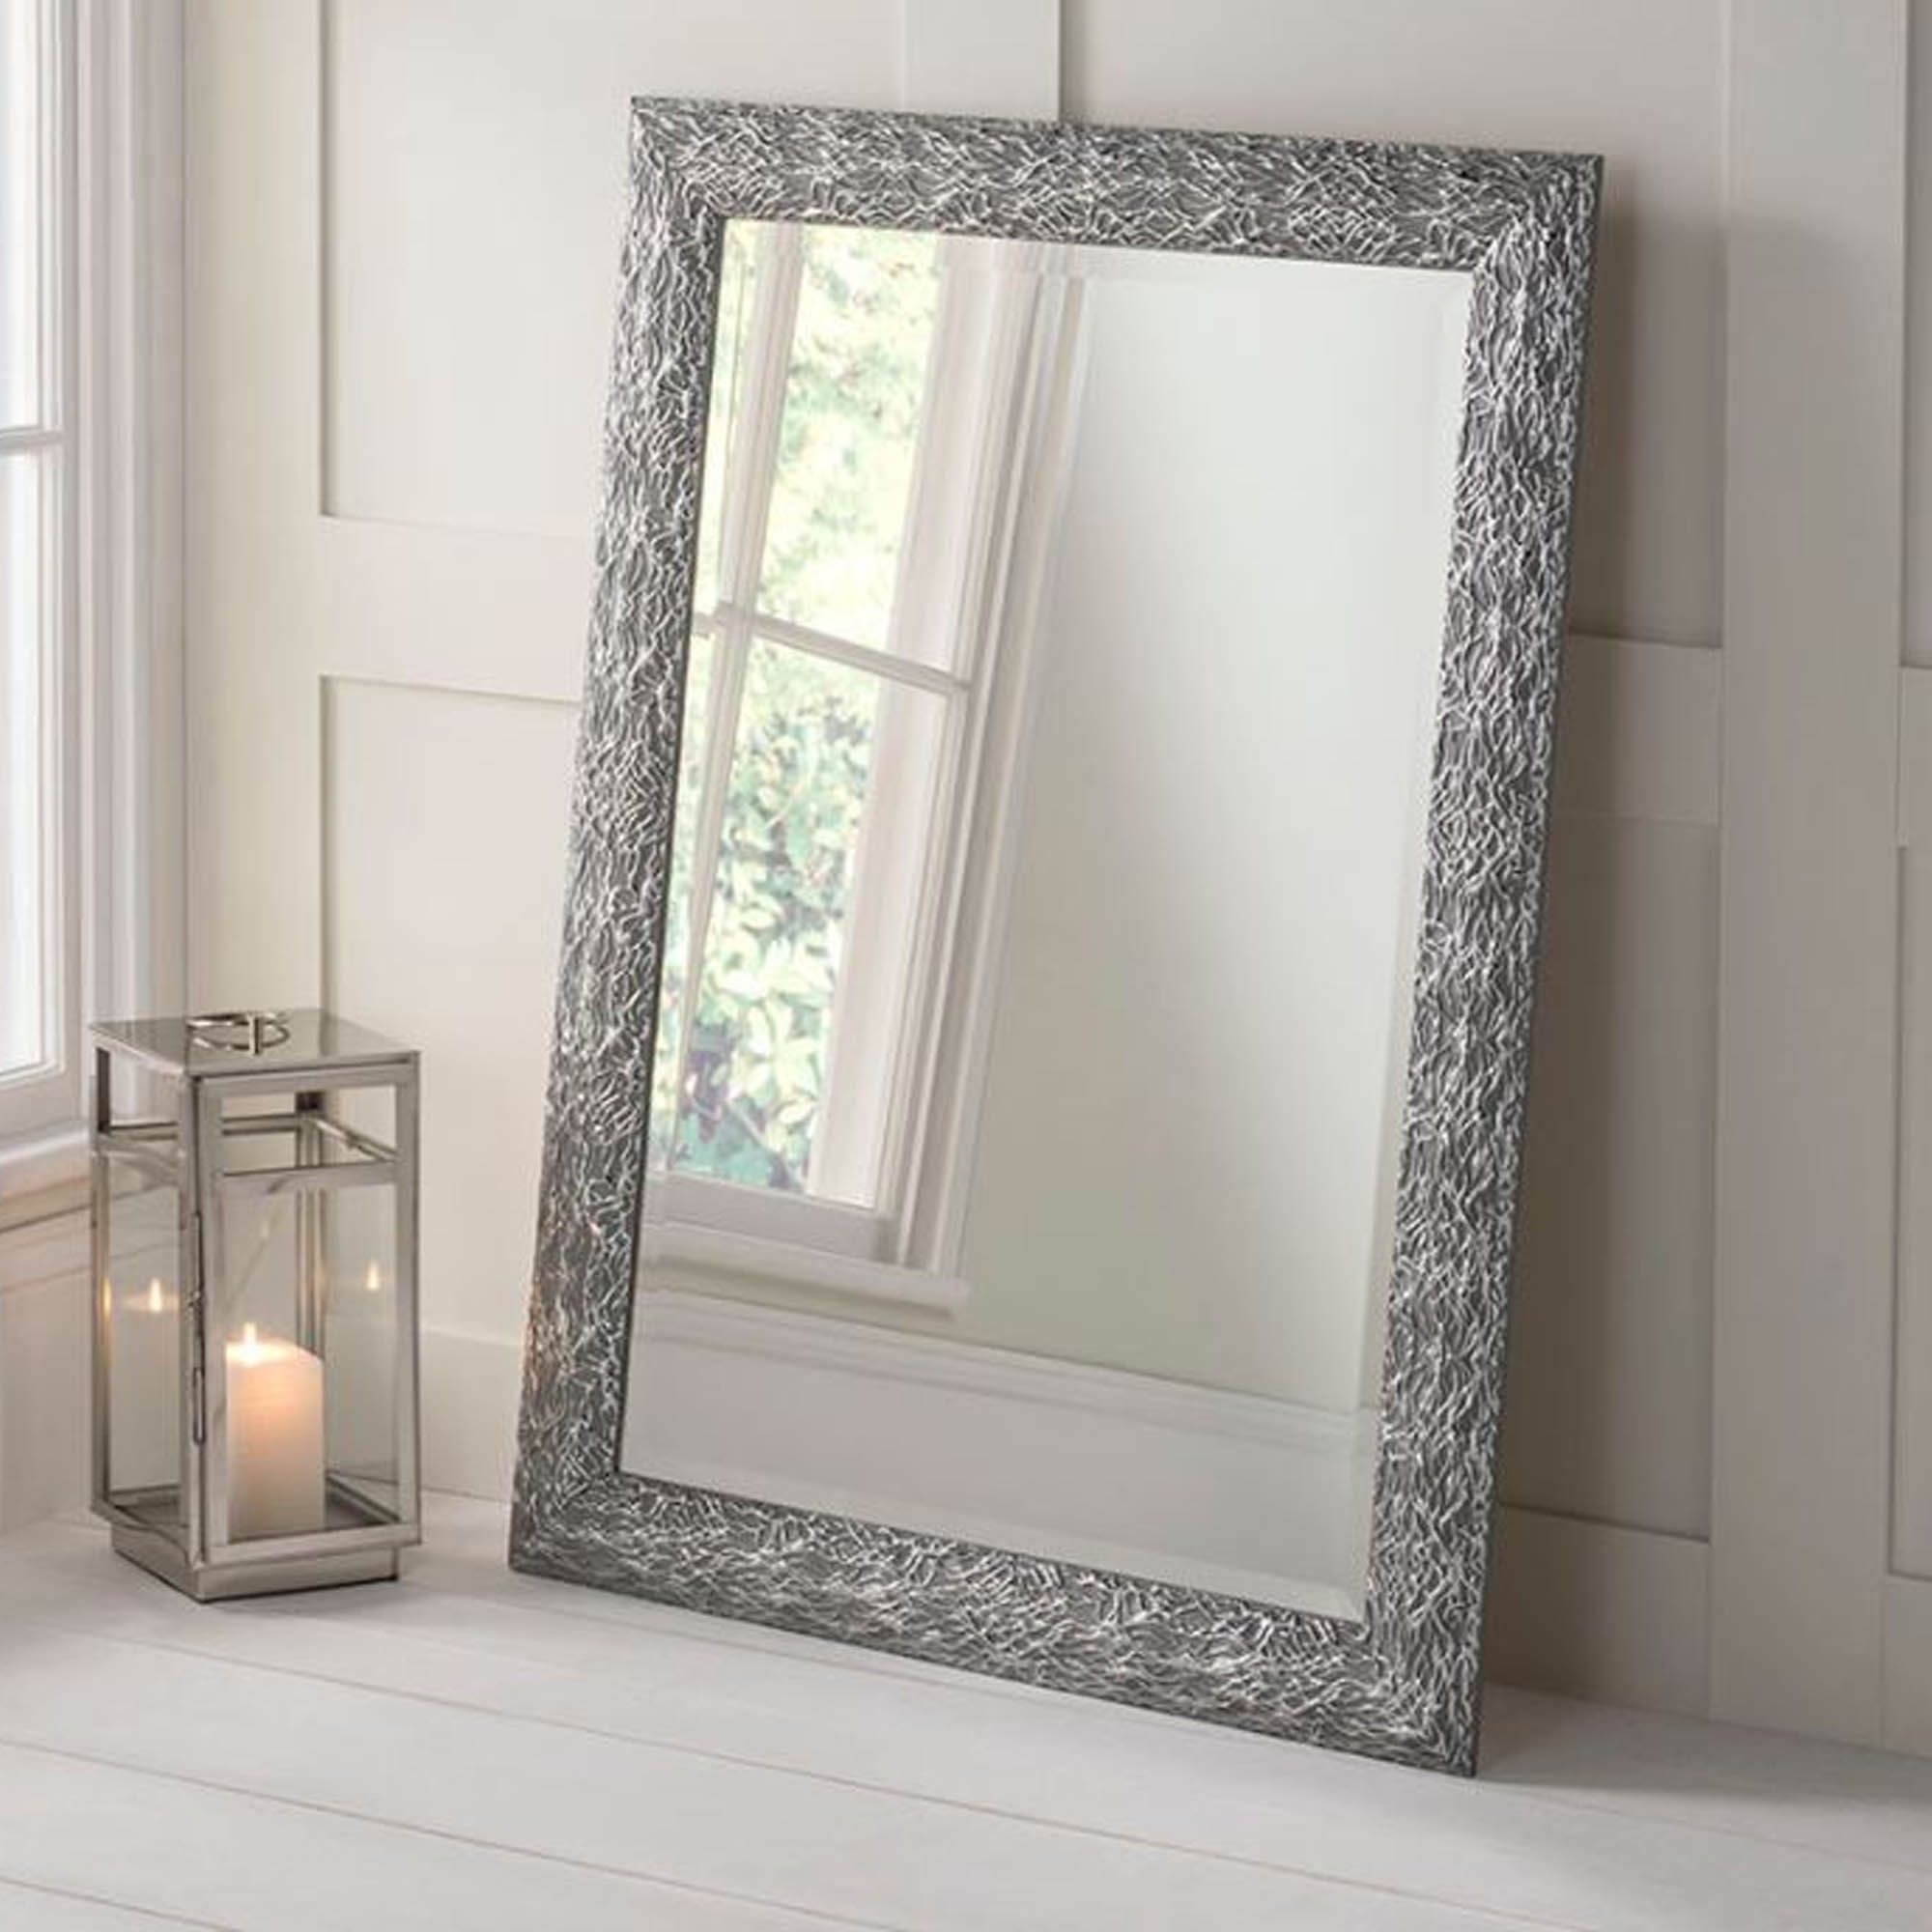 Detailed Rectangular Grey And Silver Wall Mirror | Hd365 Within Steel Gray Wall Mirrors (View 5 of 15)